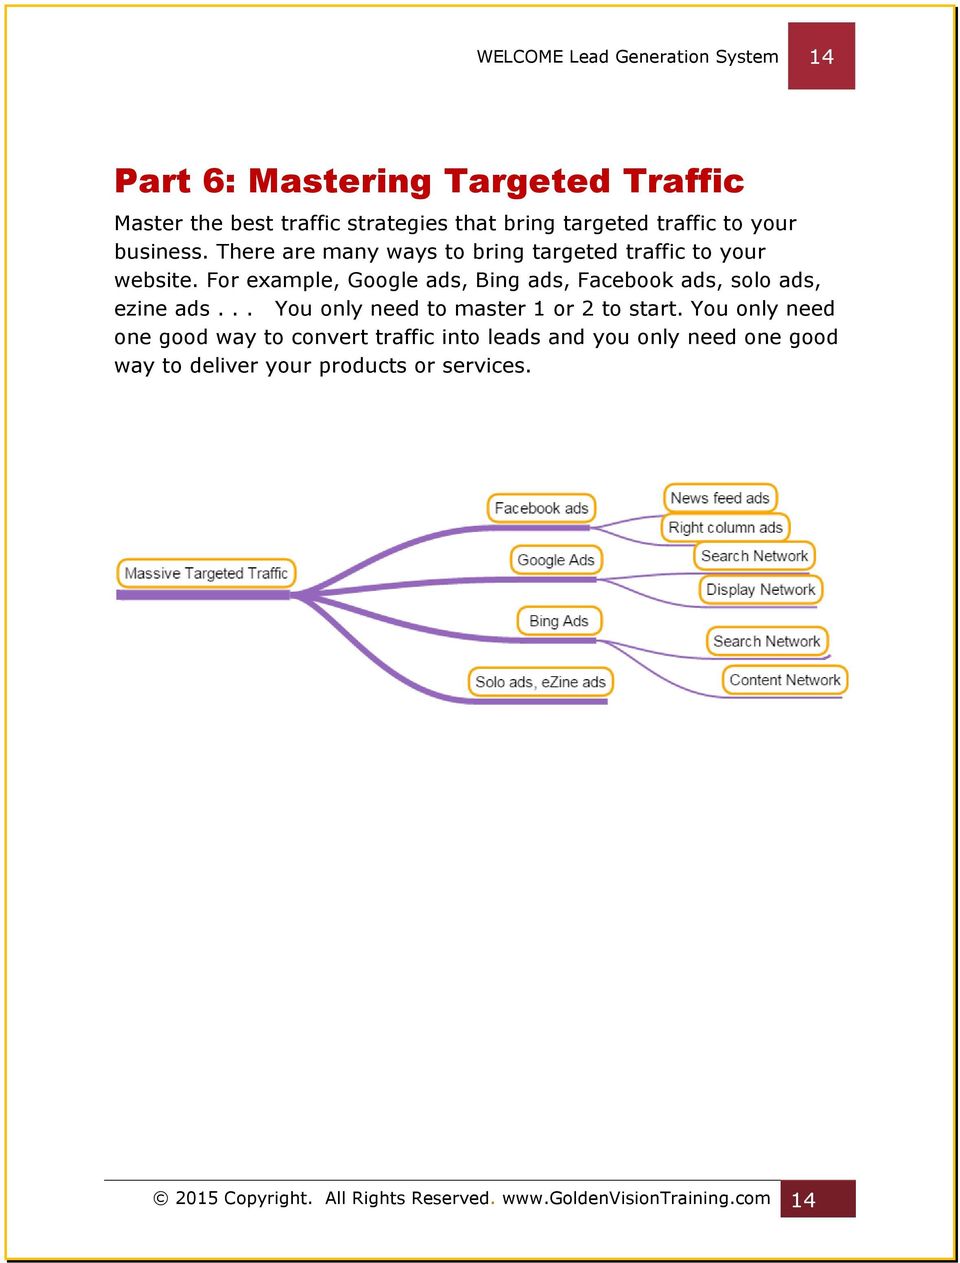 For example, Google ads, Bing ads, Facebook ads, solo ads, ezine ads... You only need to master 1 or 2 to start.